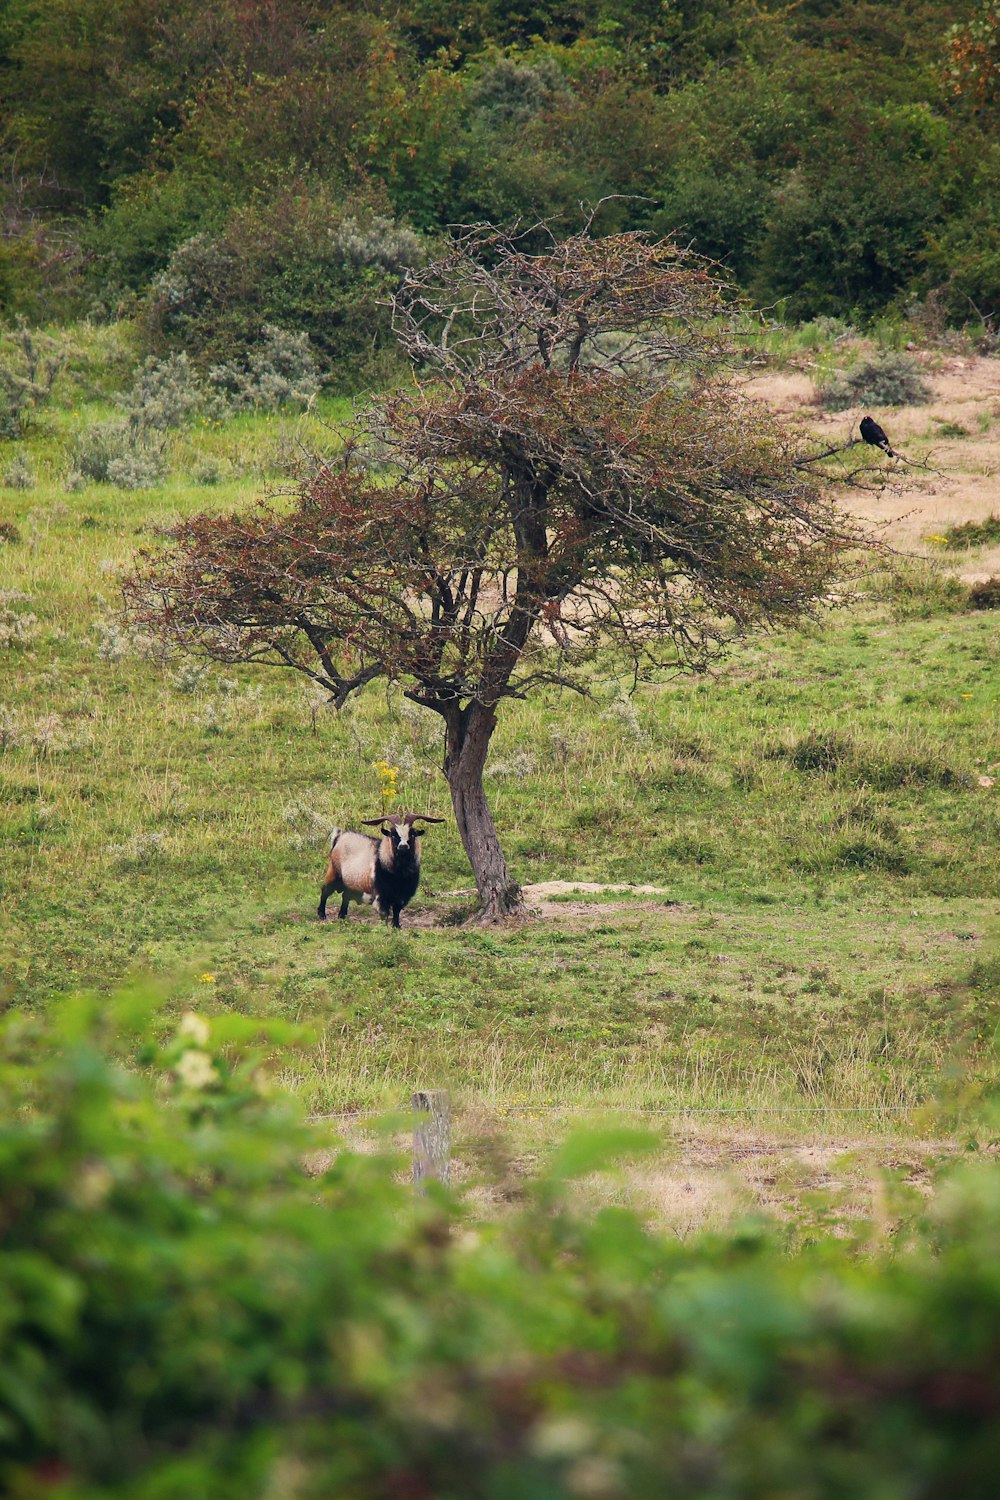 a goat standing next to a tree in a field